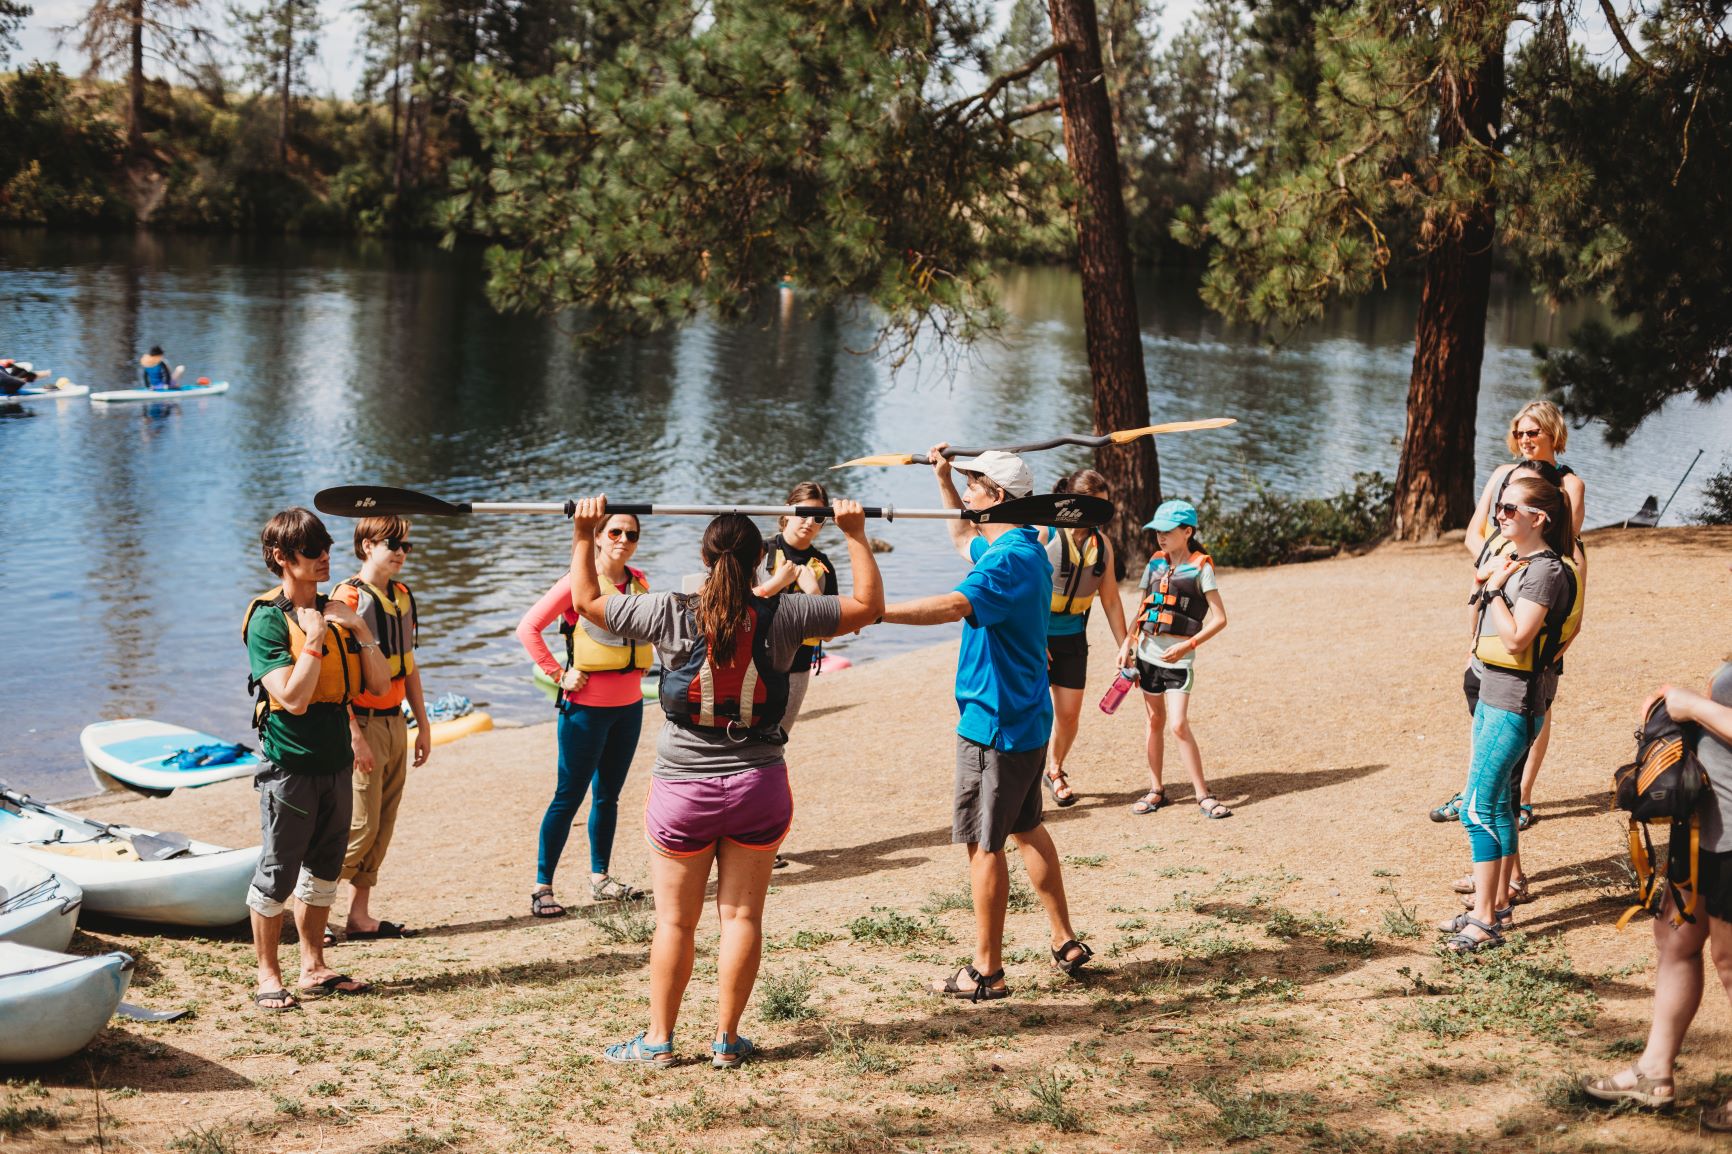 People standing on a sandy beach getting instructions on how to properly hold and use a kayak paddle during the Spokatopia Outdoor Adventures Festival in Spokane, WA.